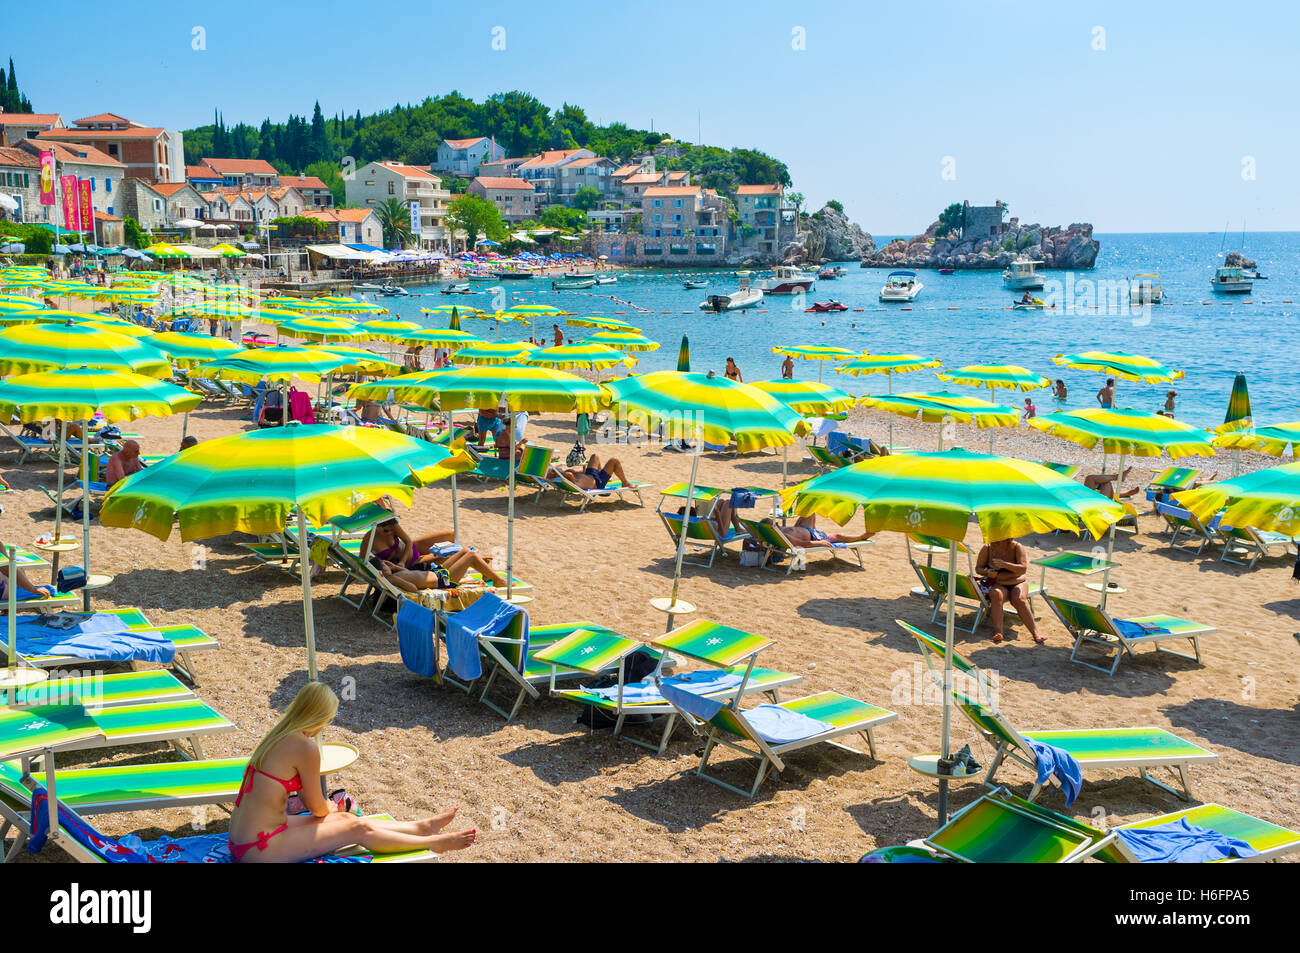 The medieval fishing village boasts the long sand coastline, that is the best place for relax, Sveti Stefan Montenegro Stock Photo